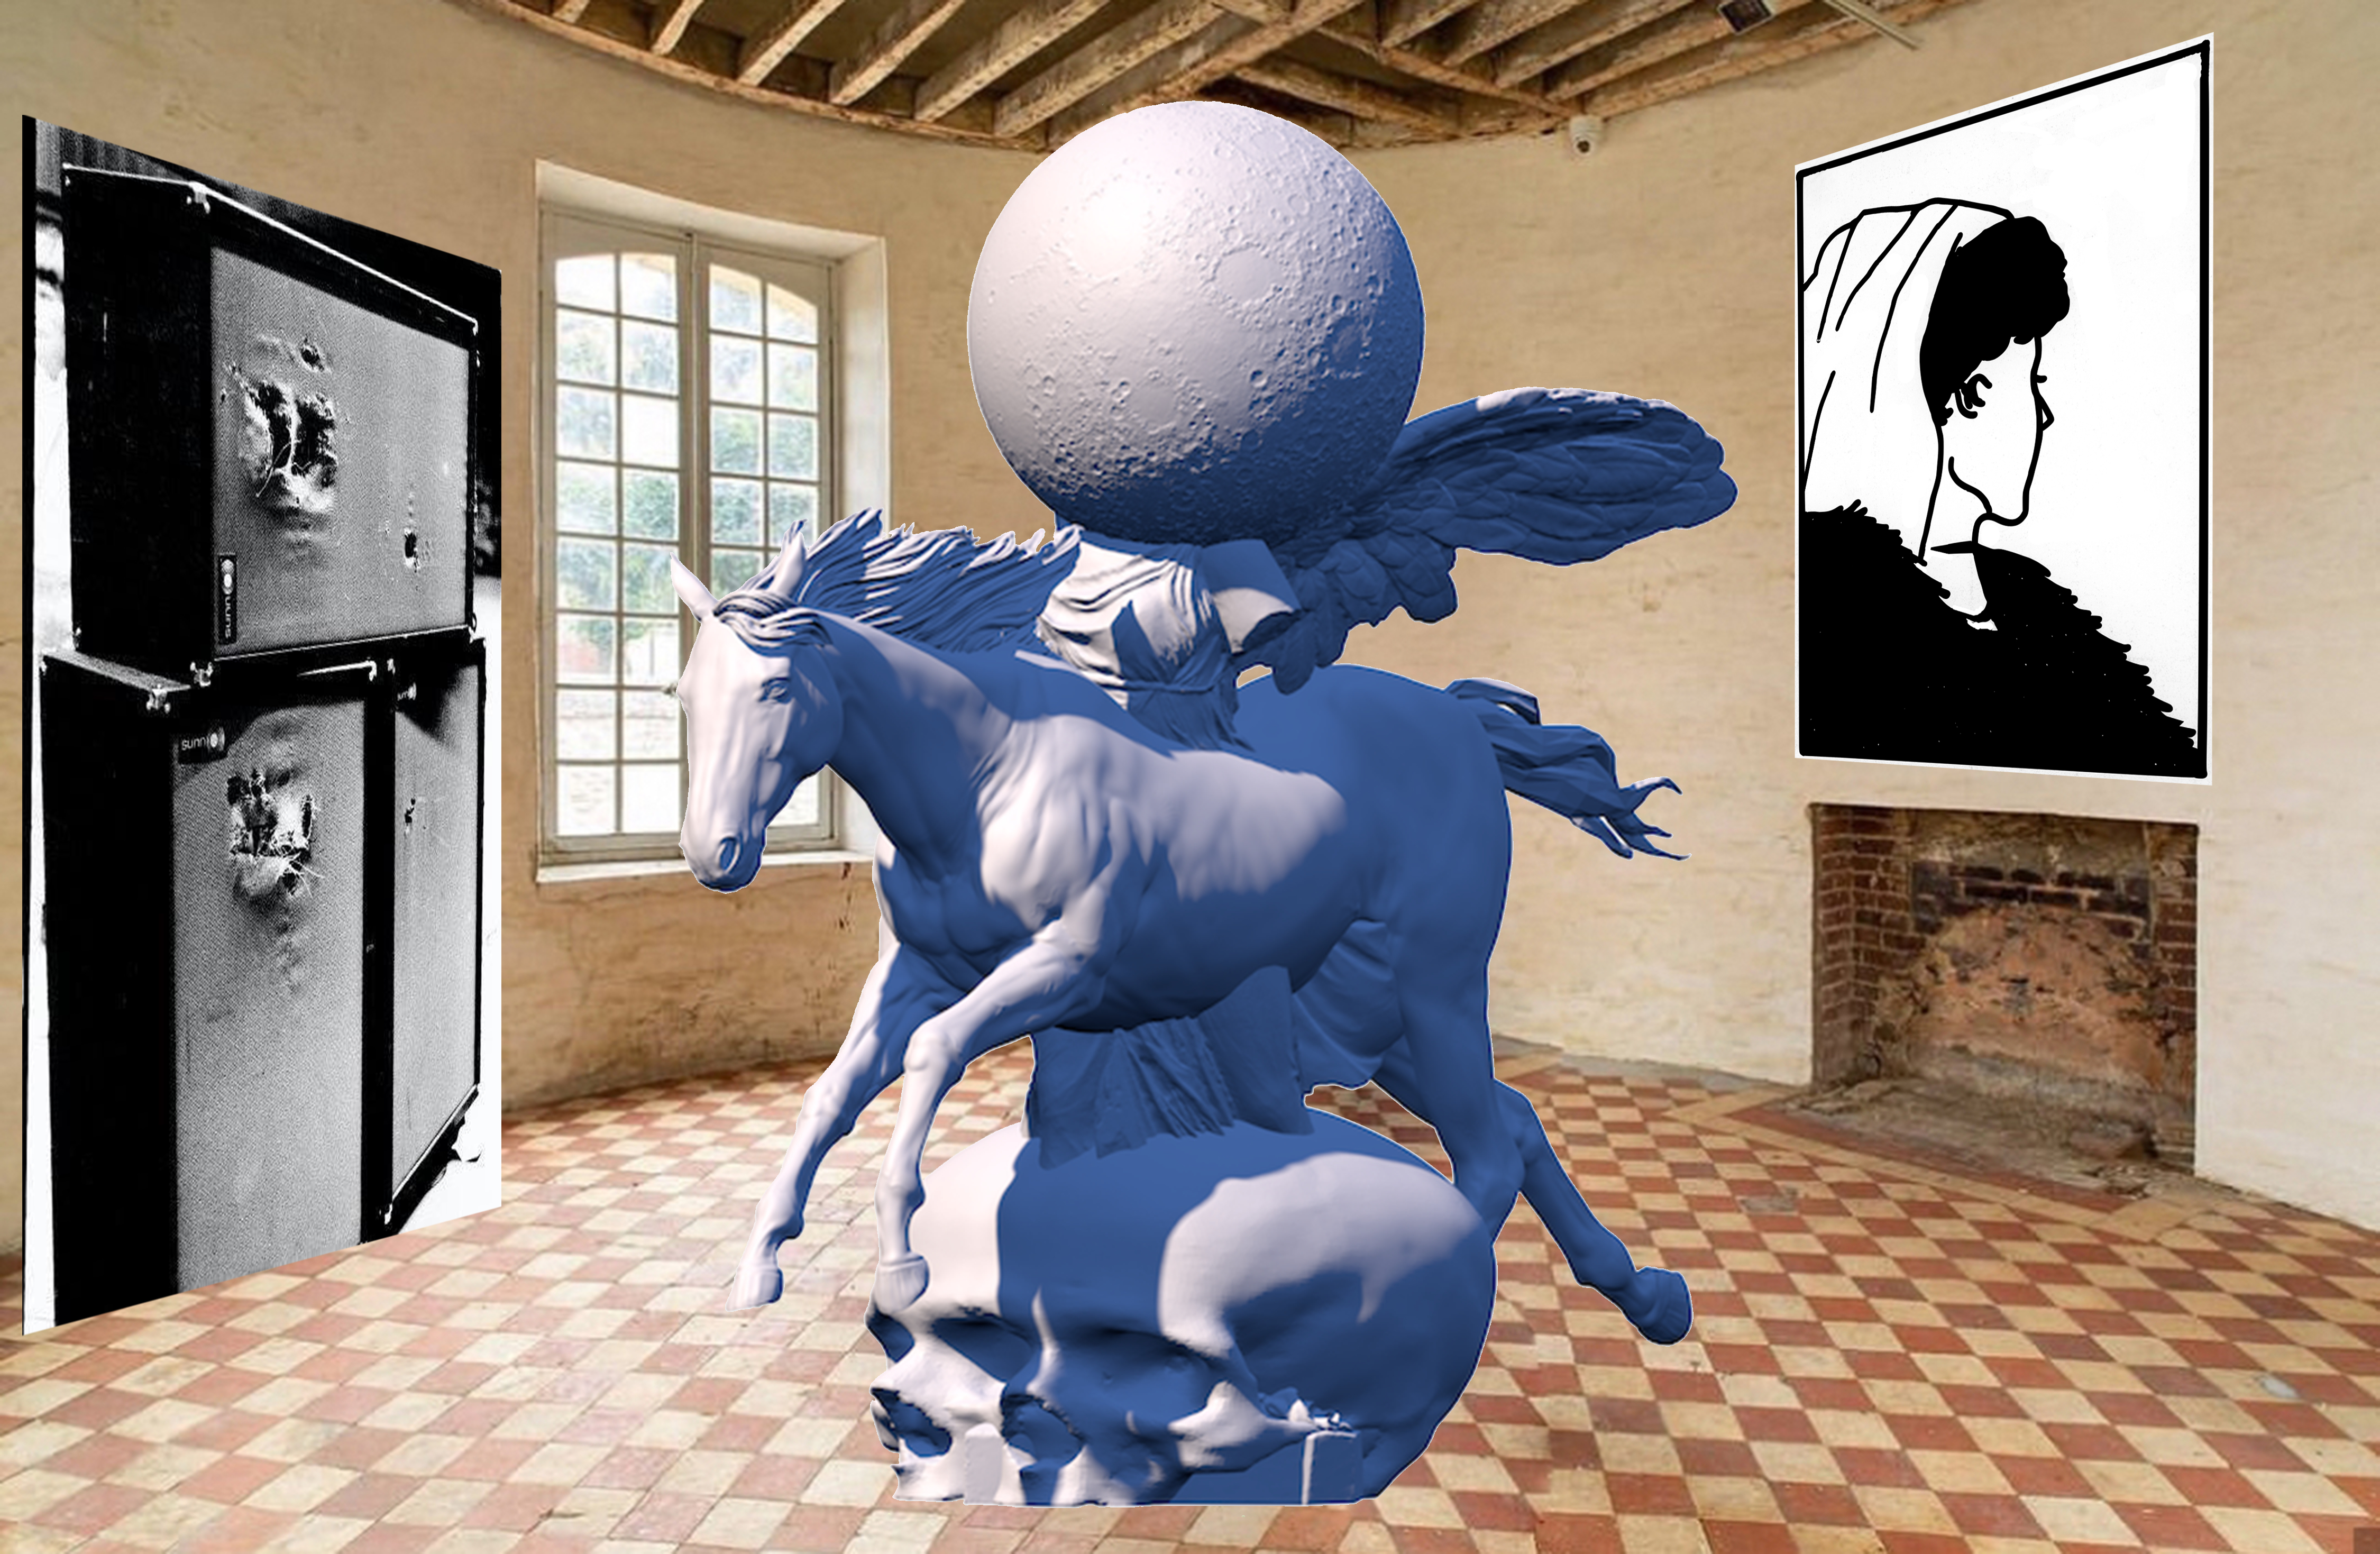 darkpegasusvictory at chateau de boisgeloup secret picasso studio with Jimi Hendrix sunn O))) destroyed stacks and young woman old hag optical illusion